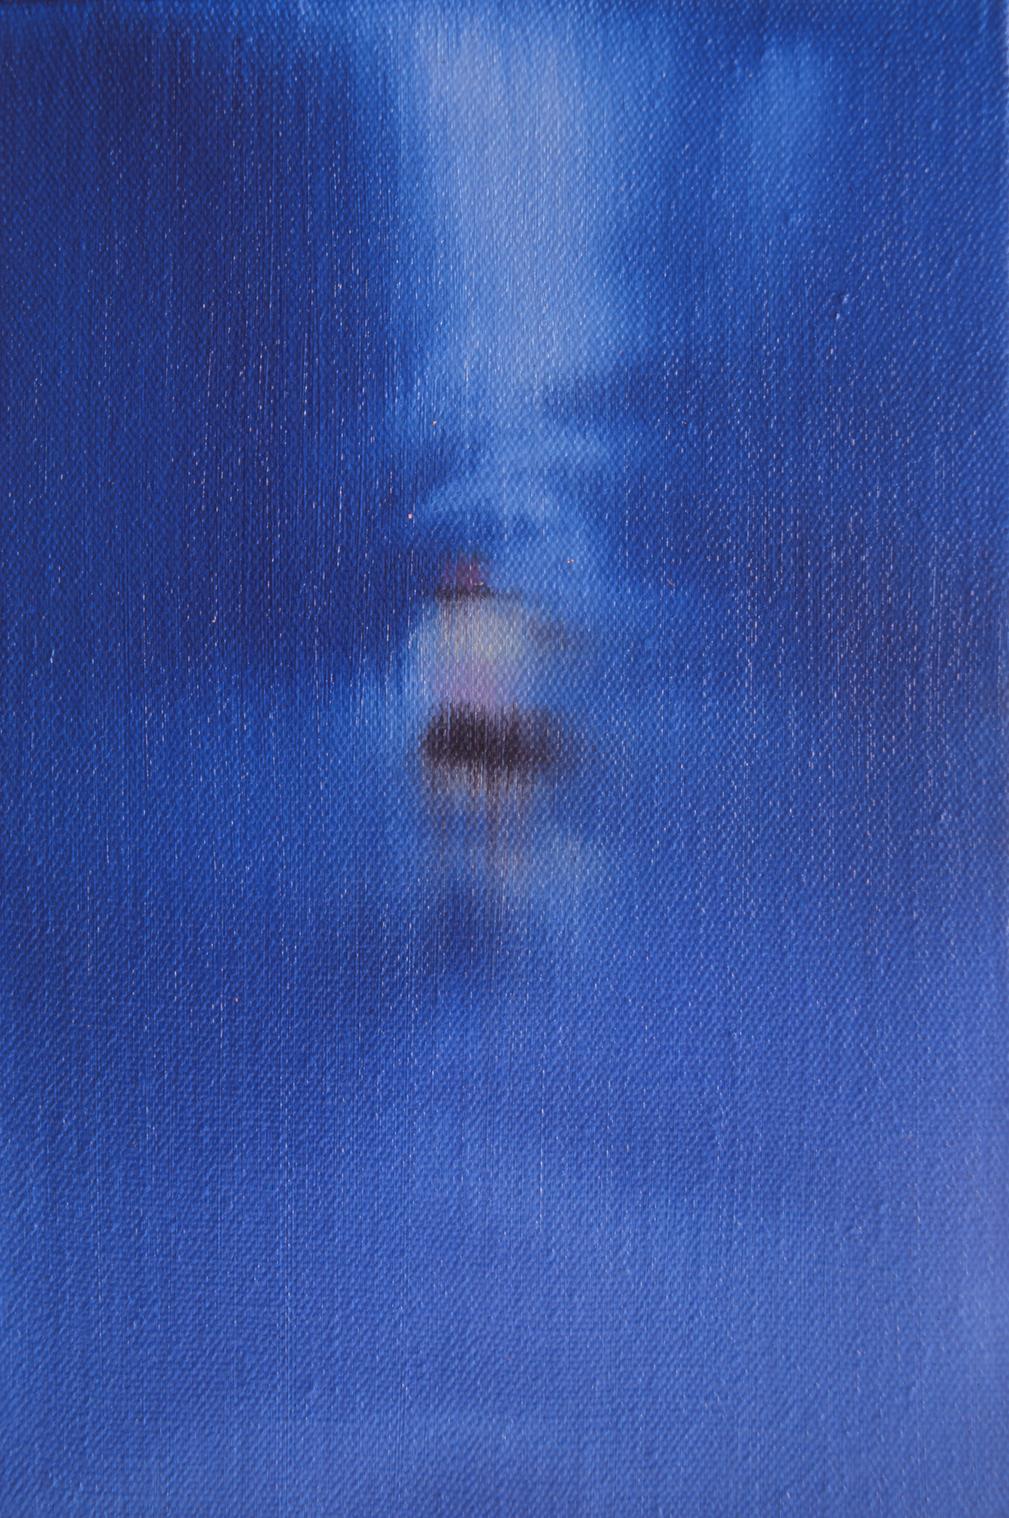 textured Figurative painting- Water Series No.2 by He Wenjue 
Dimension : 30 x 20cm 
Material :oil on canvas 
Date: 2009 

About Water Series 
He Wenjue grew up in Hunan province, China, where the tributaries of the Xiangjiang River surround almost